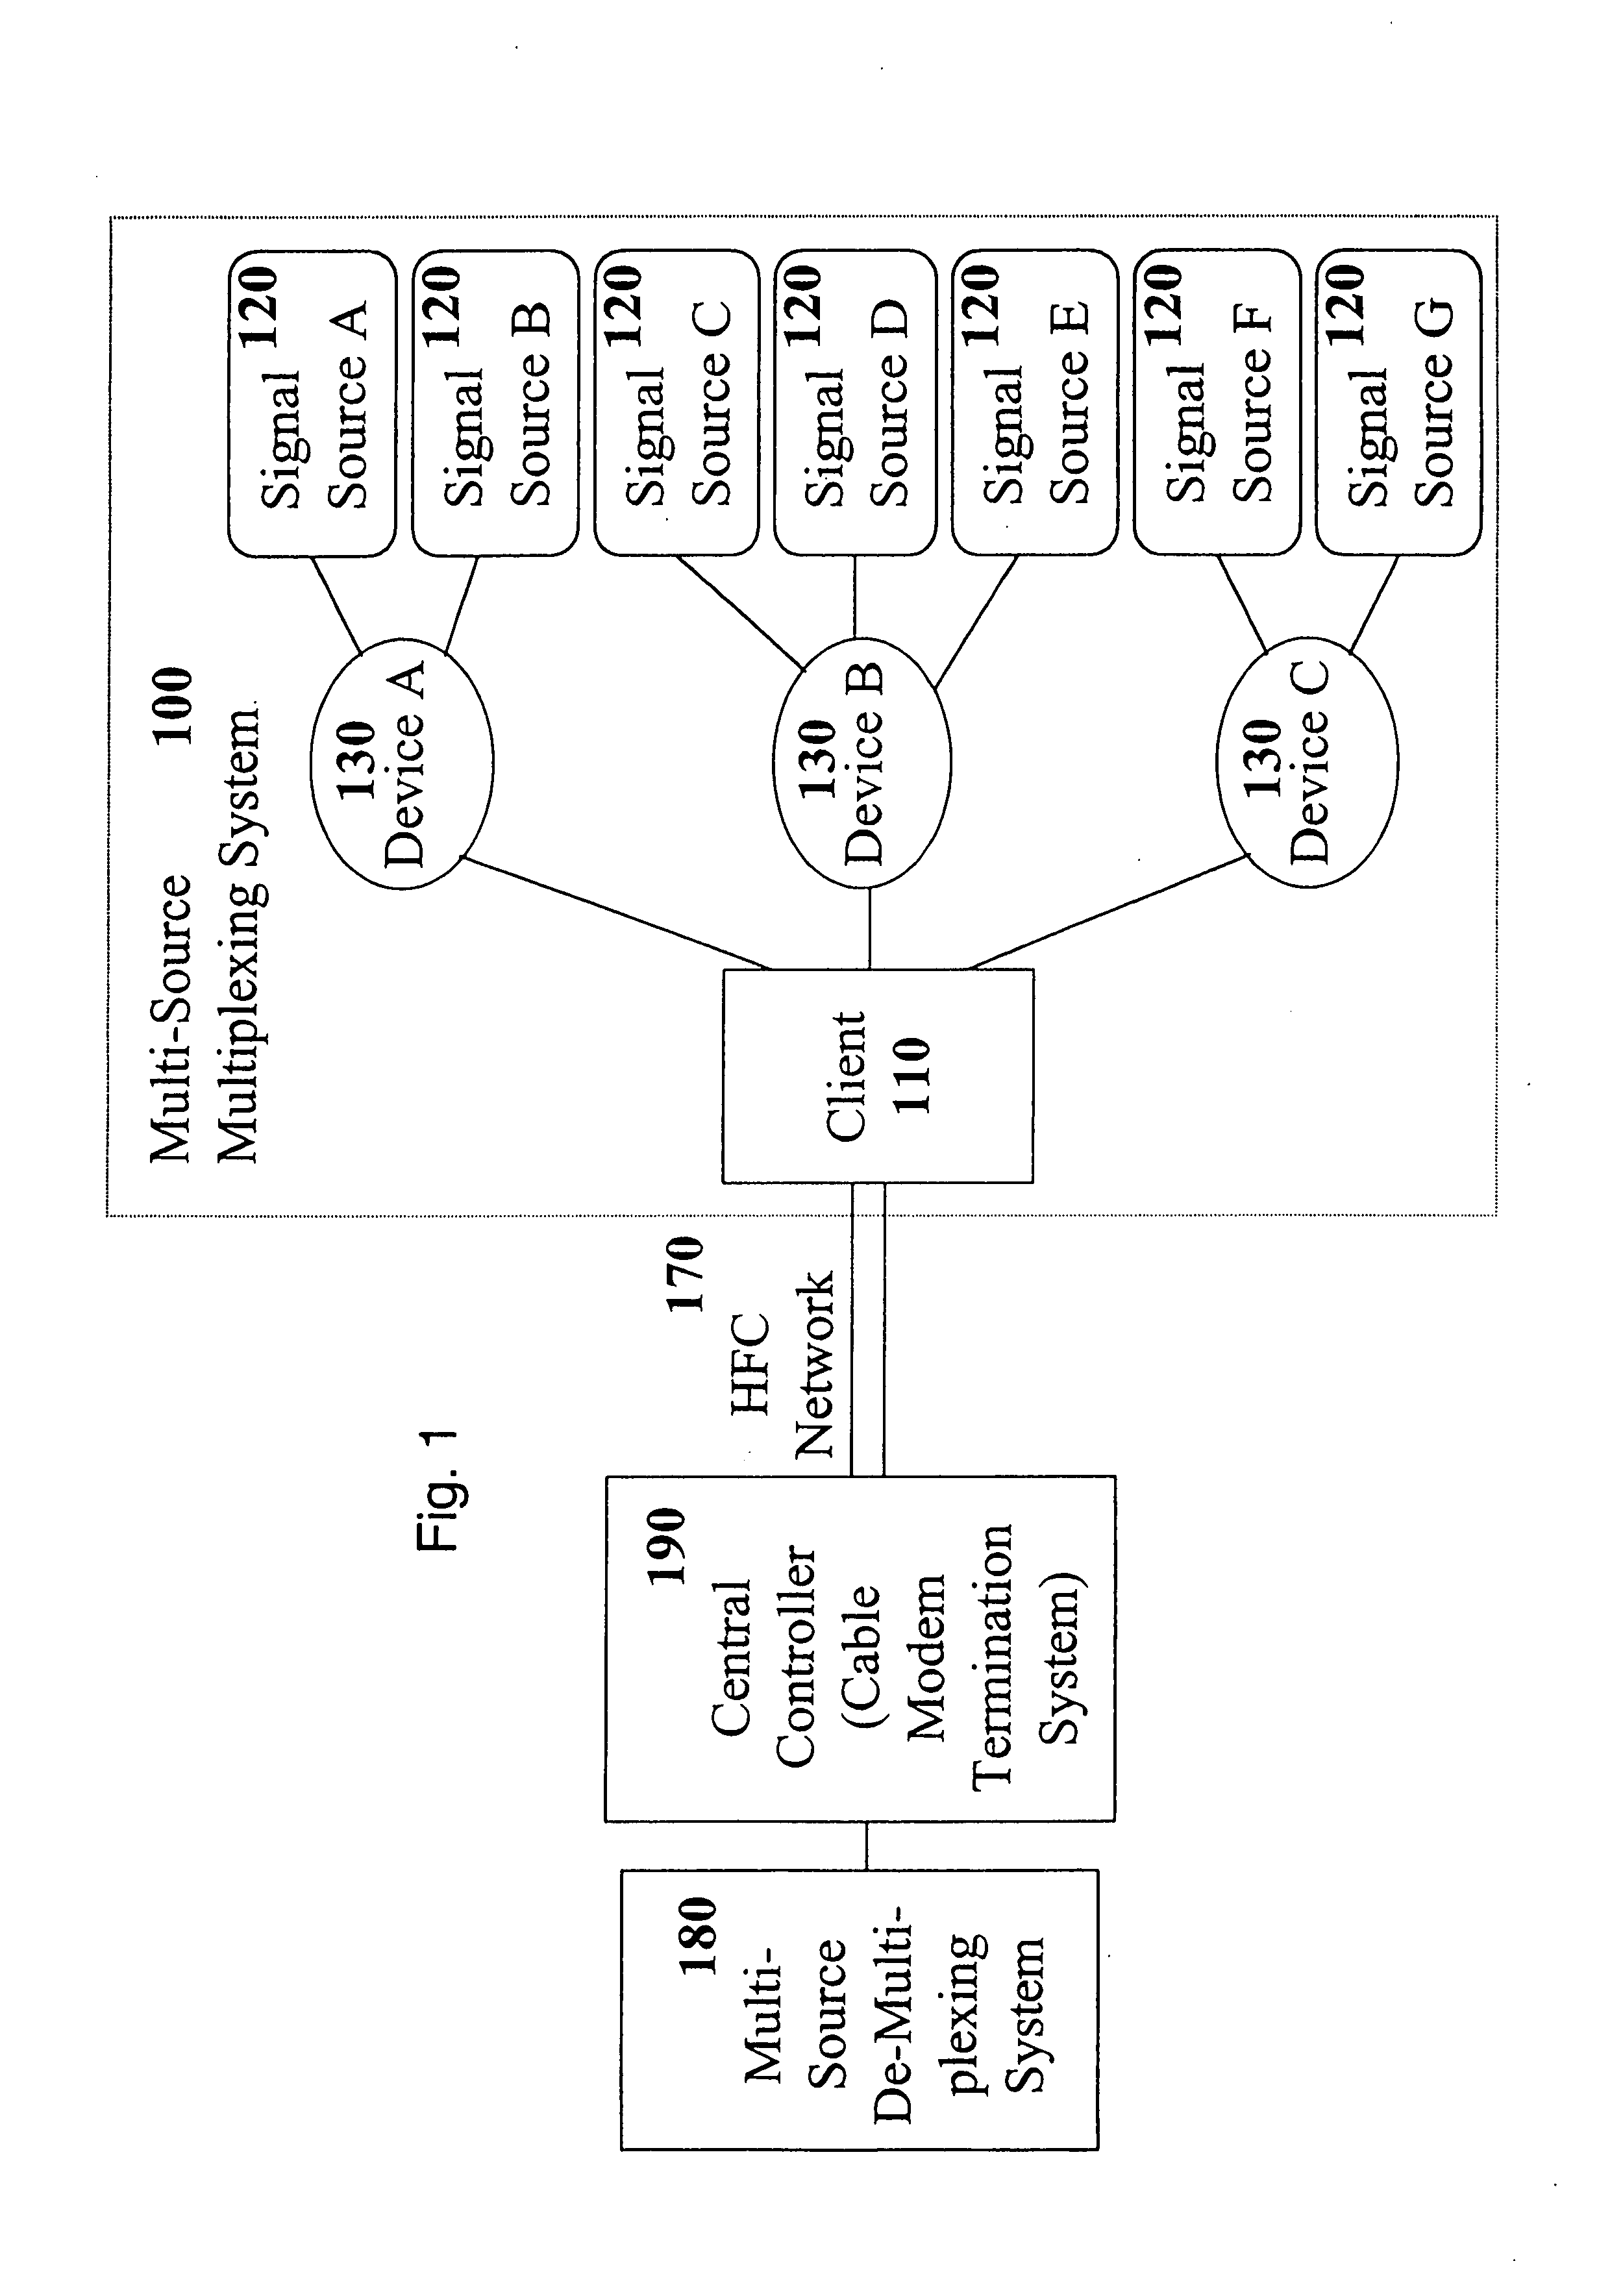 Allocation of packets in a wireless communication system